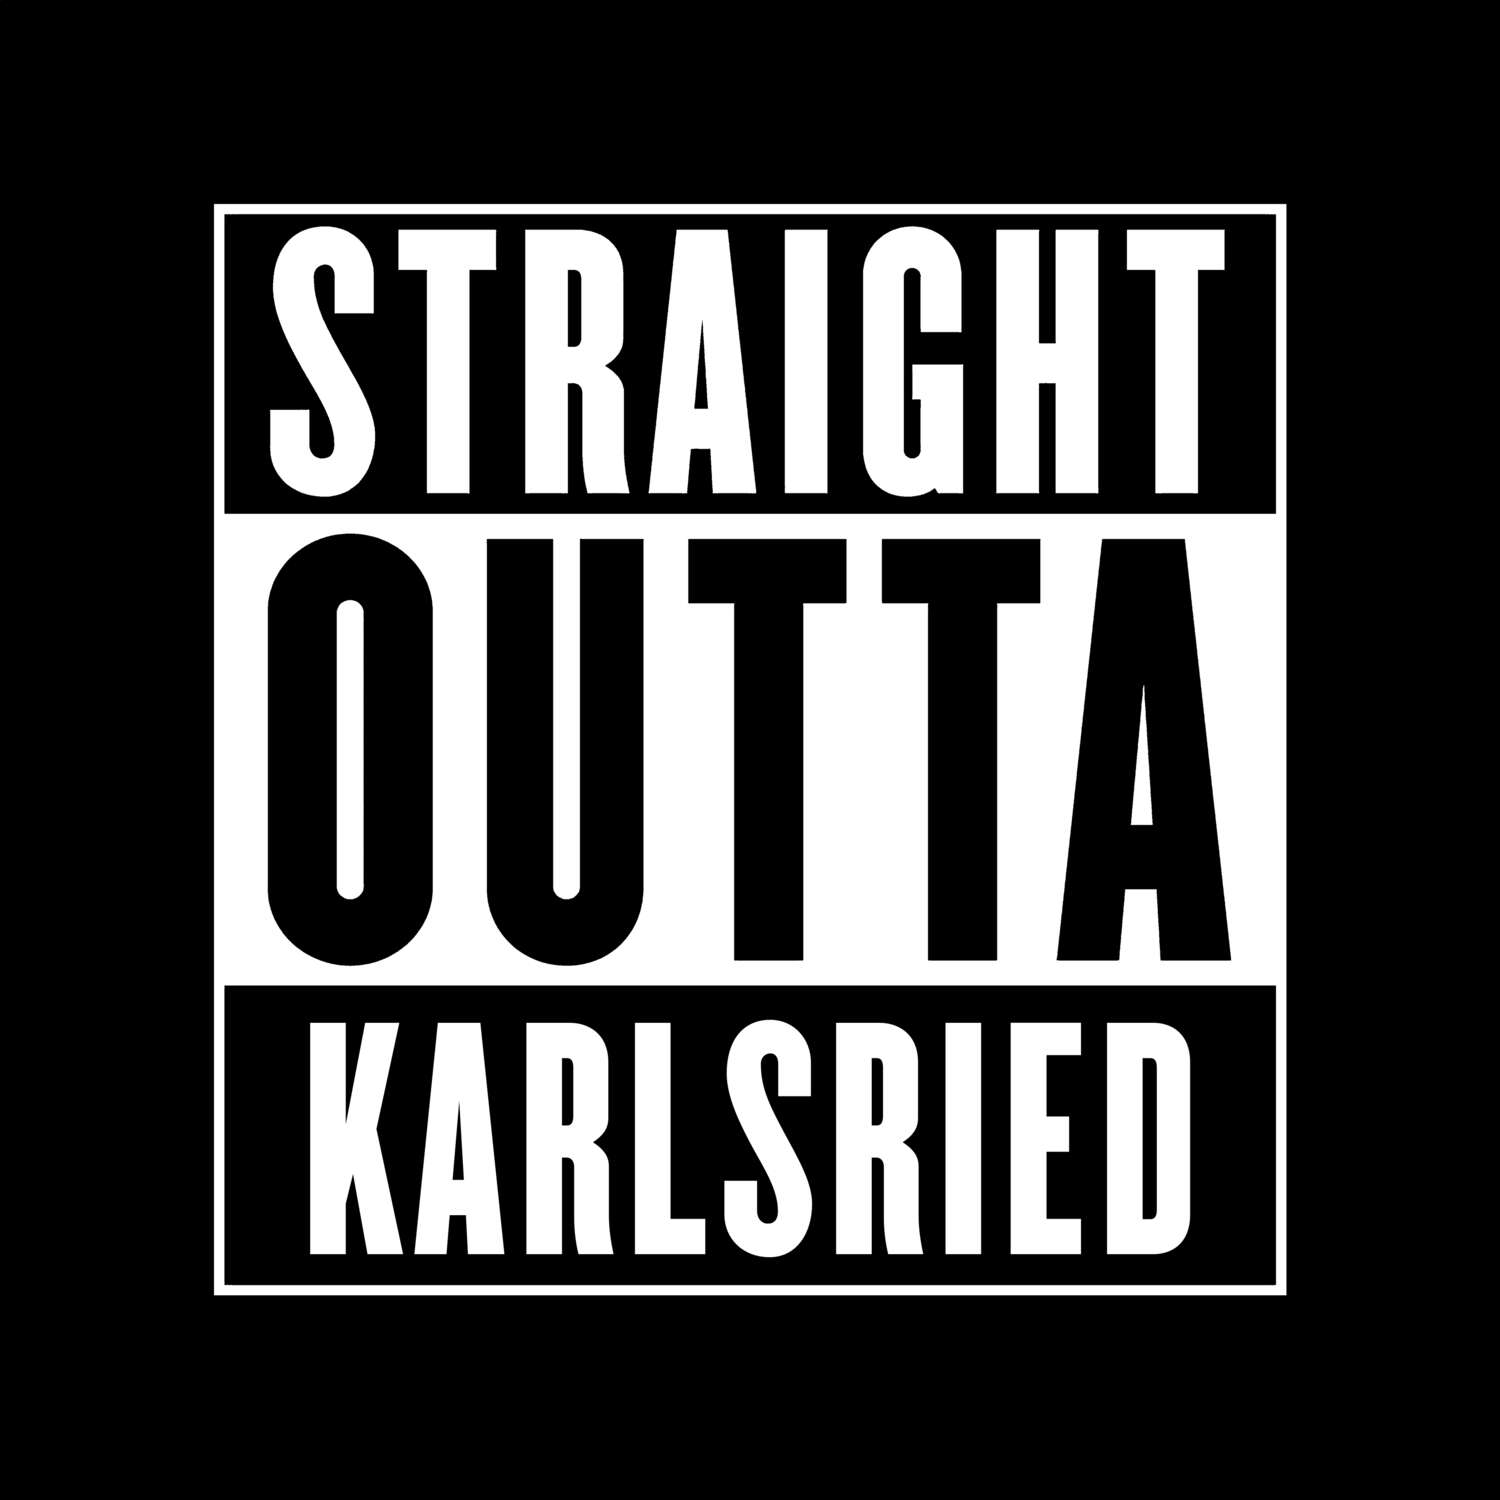 Karlsried T-Shirt »Straight Outta«